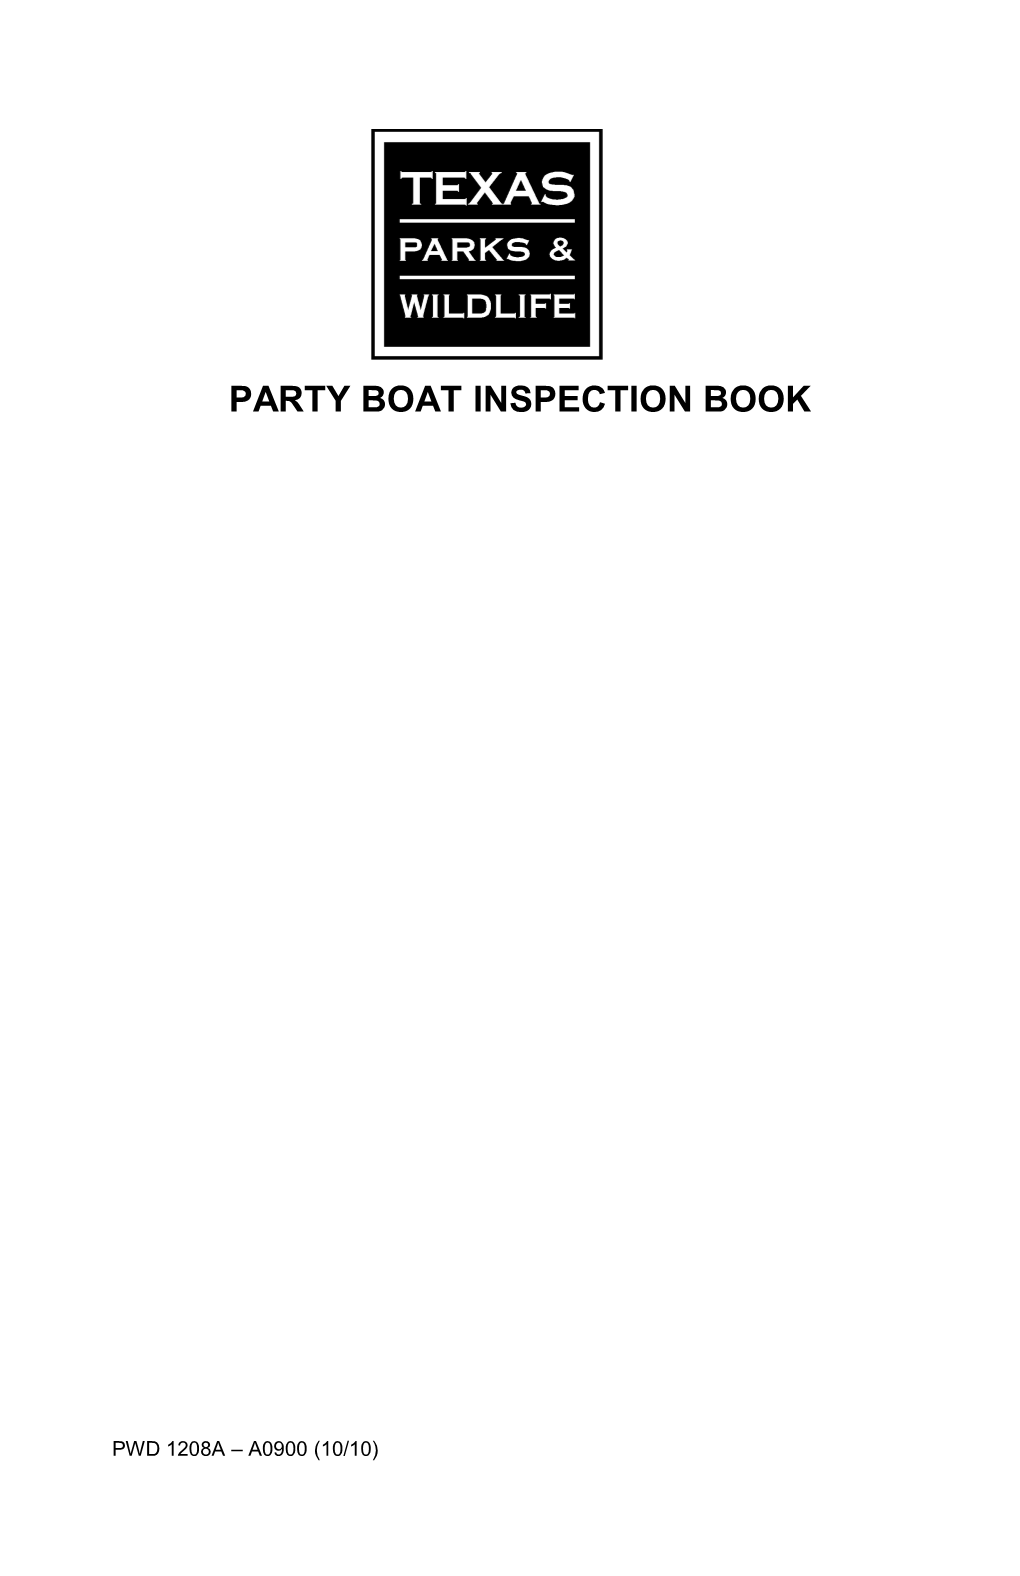 Party Boat Inspection Book